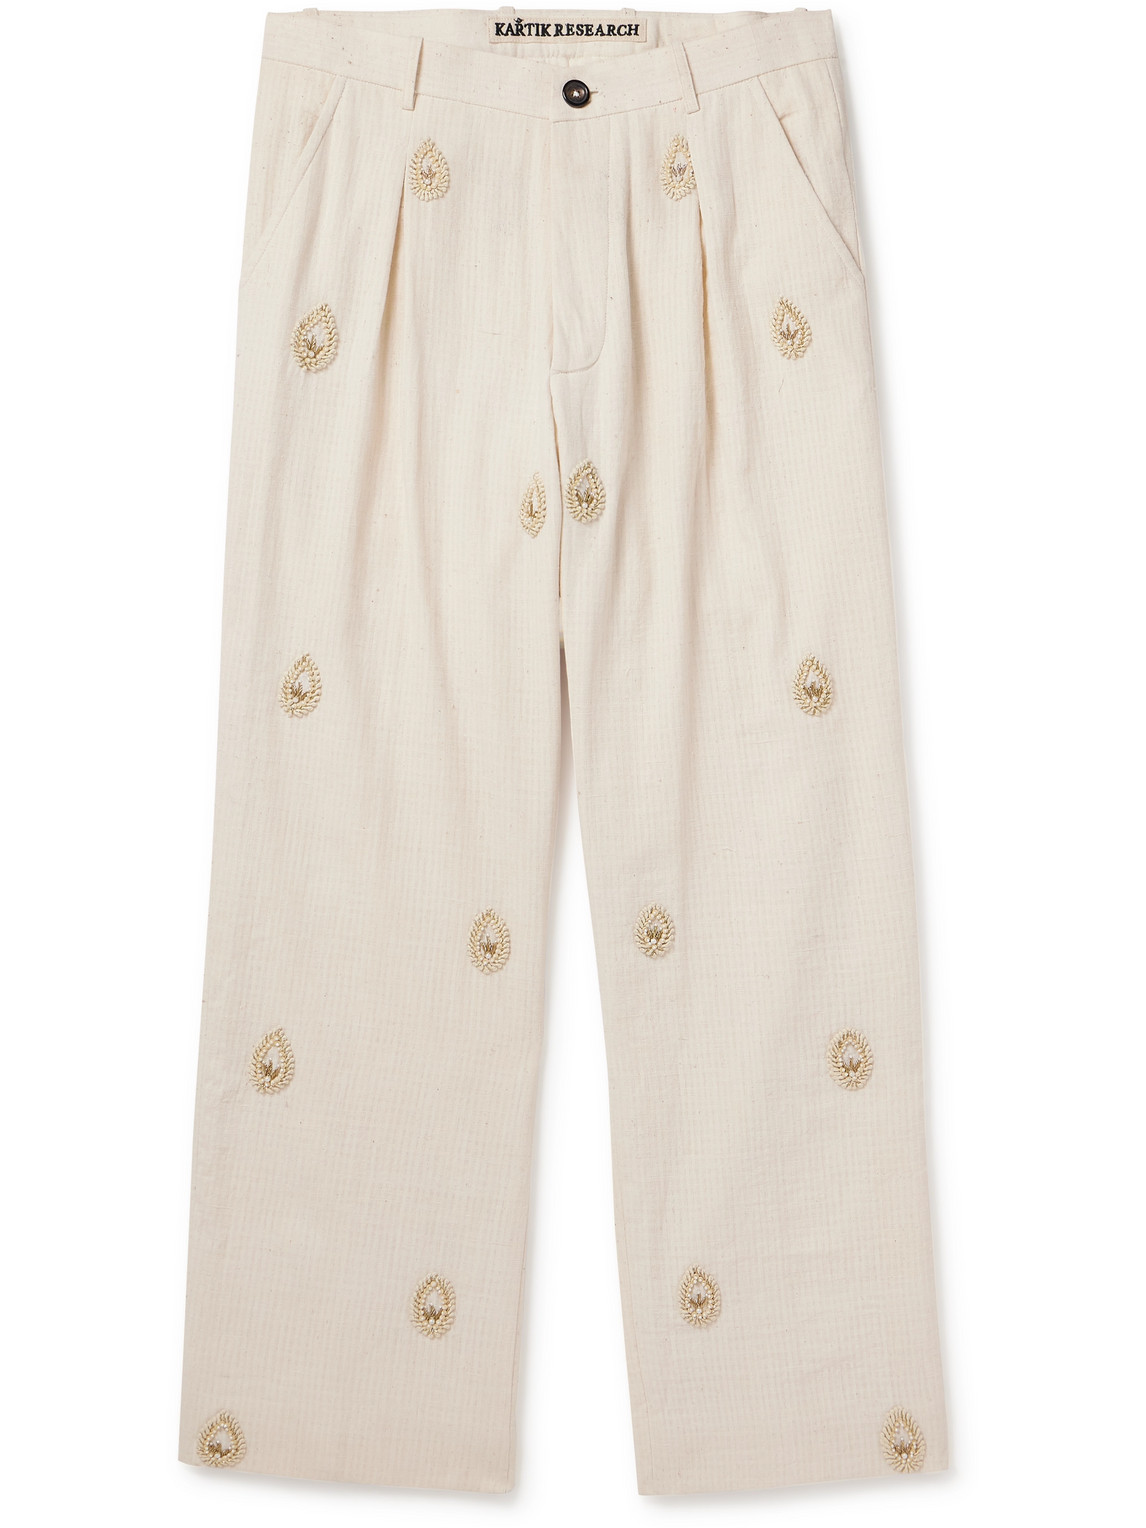 Kartik Research Straight-leg Embellished Pleated Cotton Trousers In Neutrals